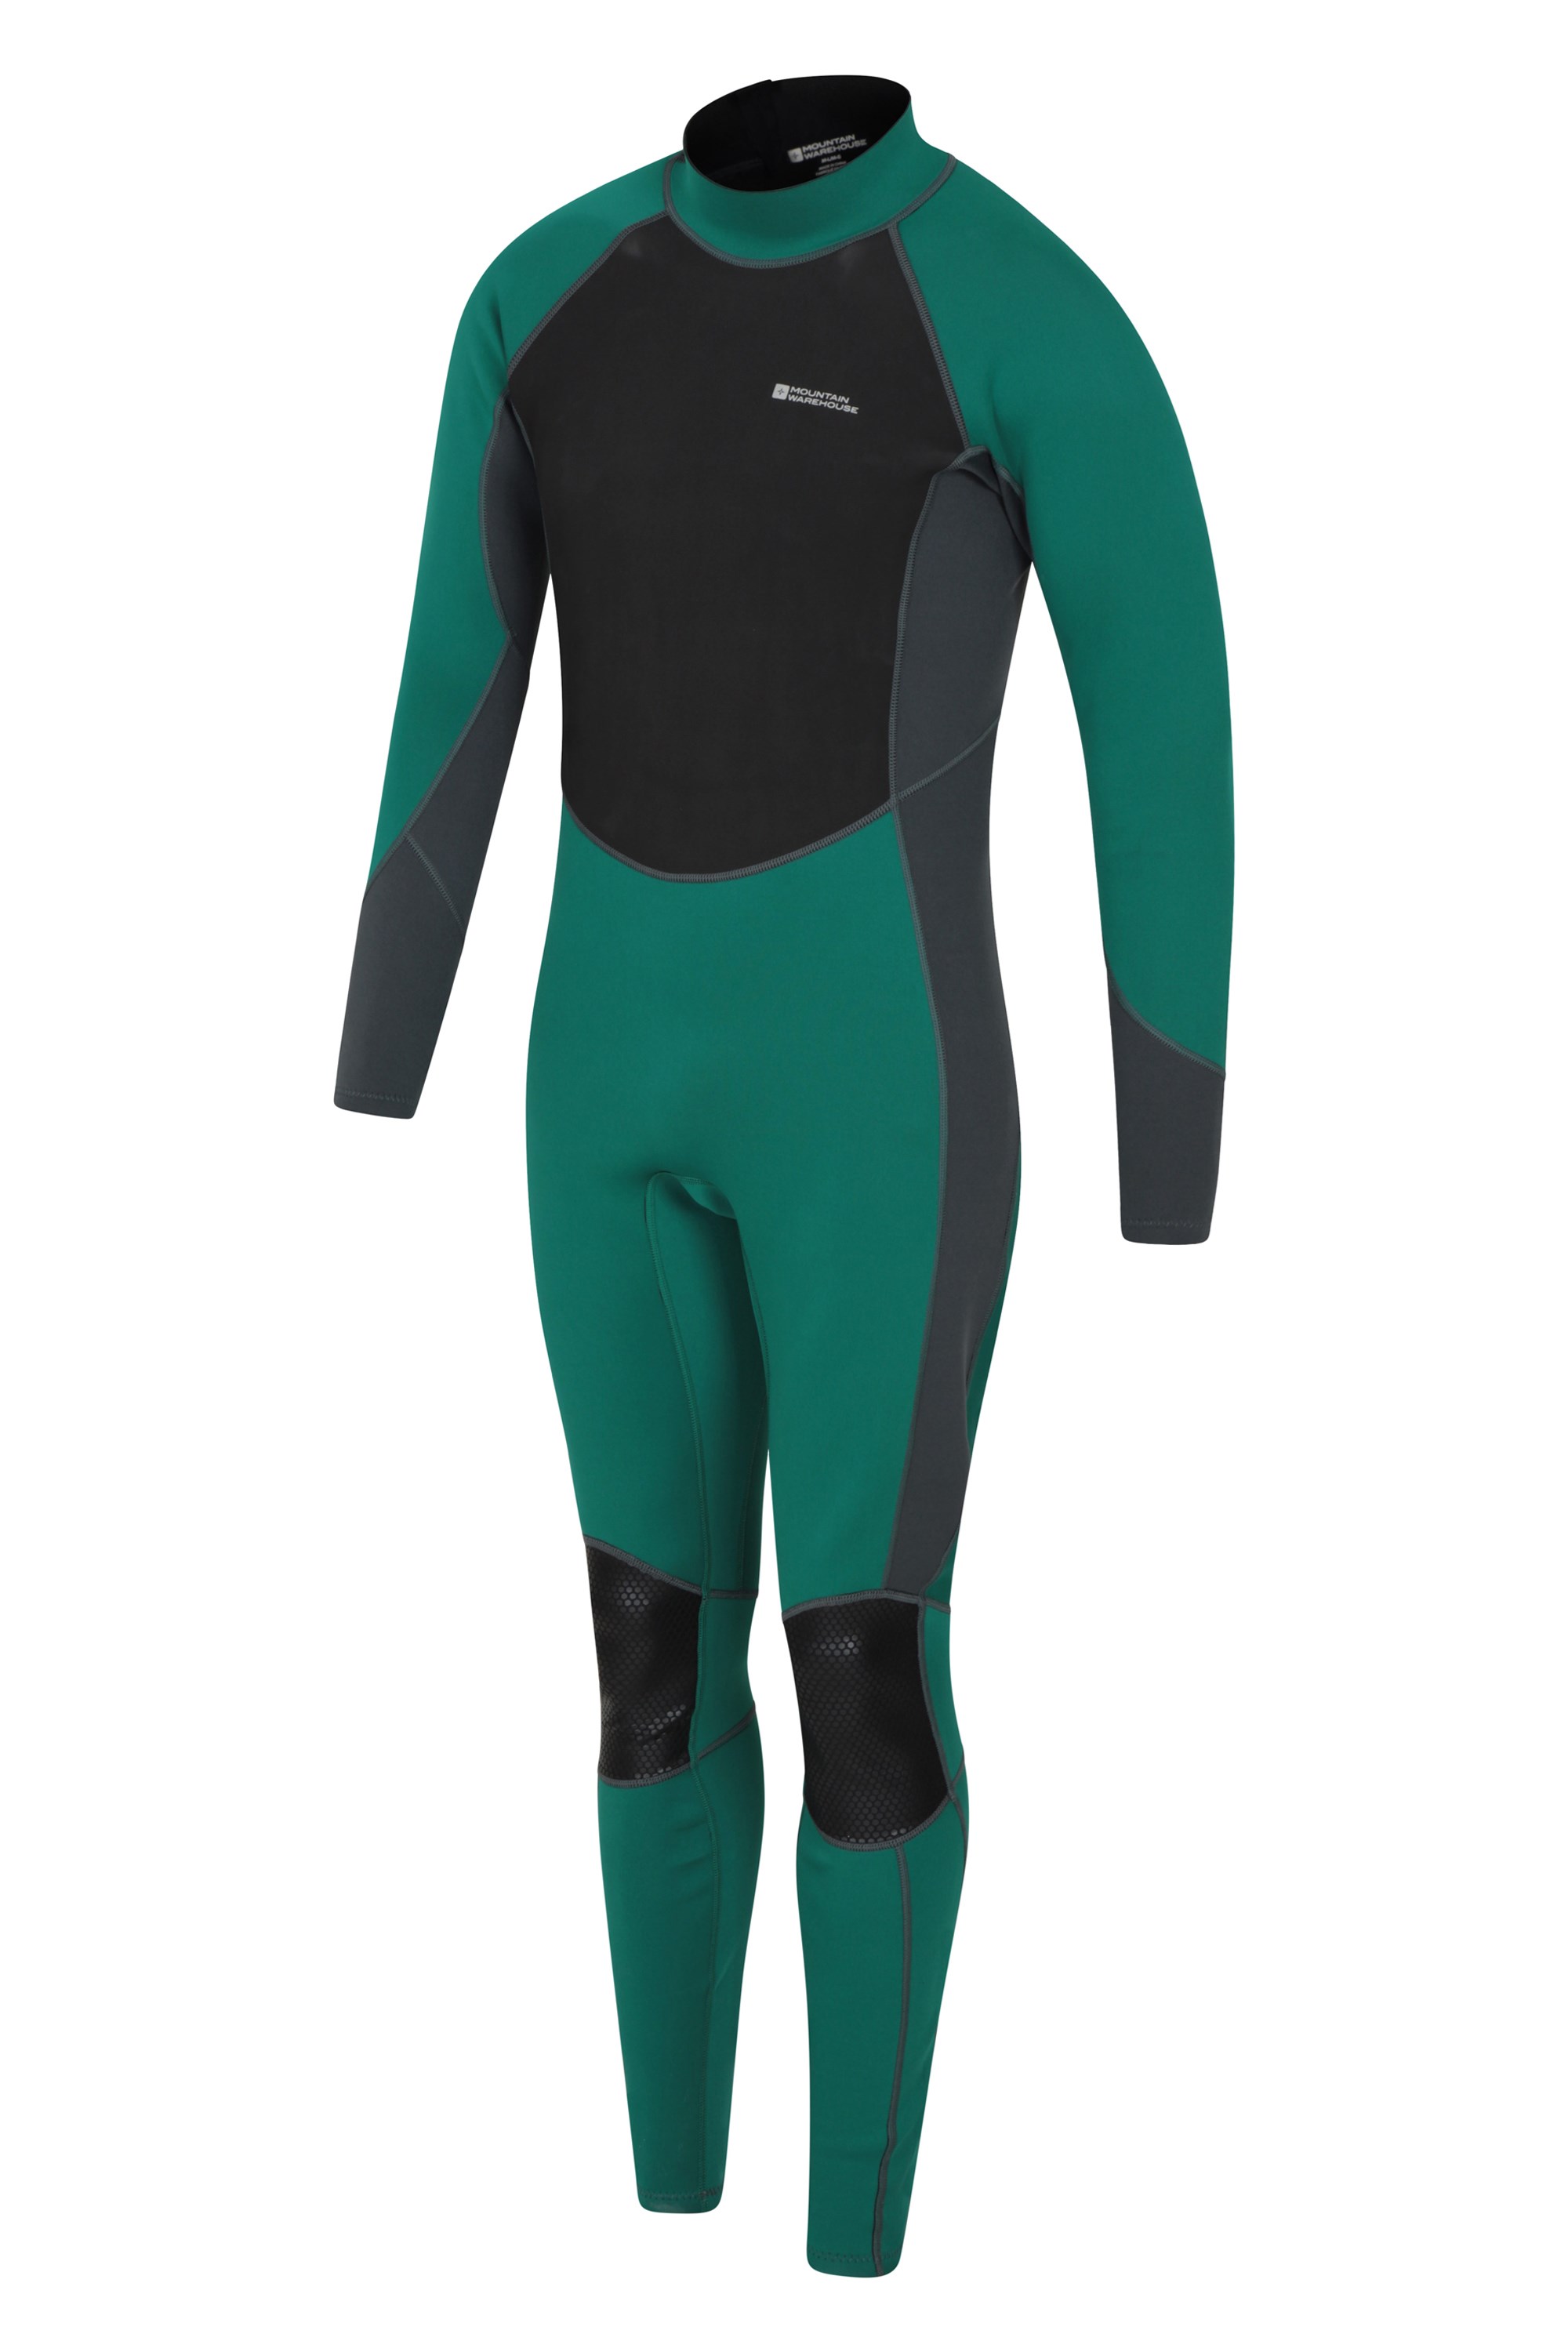 2.5 mm Mountain Warehouse Mens Wetsuit with Neoprene Fabric and Flat Seams 